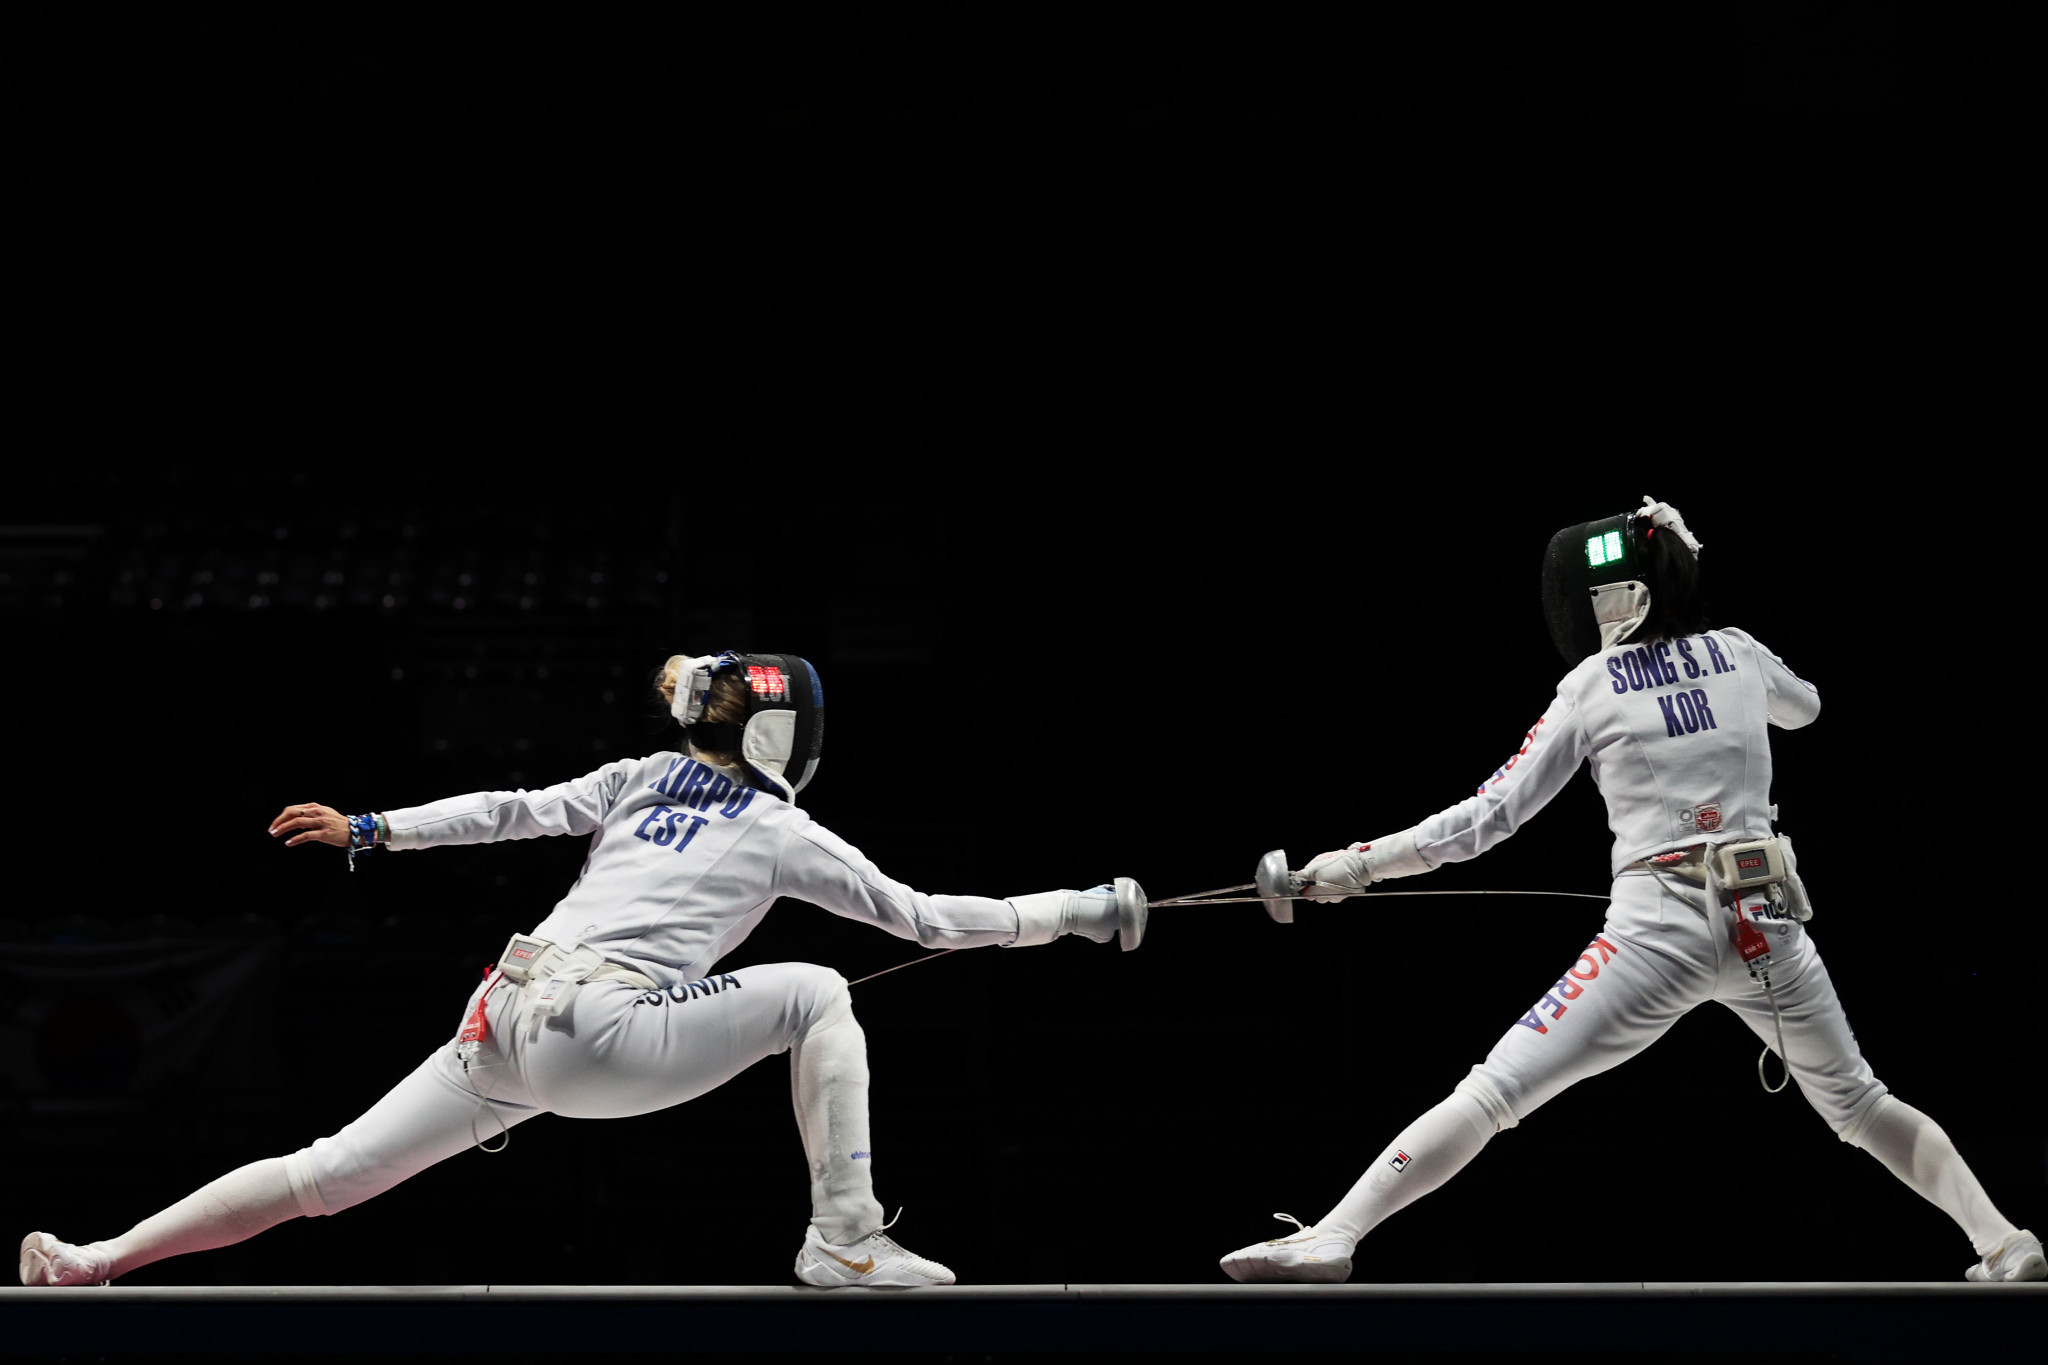 Olympic silver medallist Song clinches victory at women's épée FIE World Cup in Barcelona